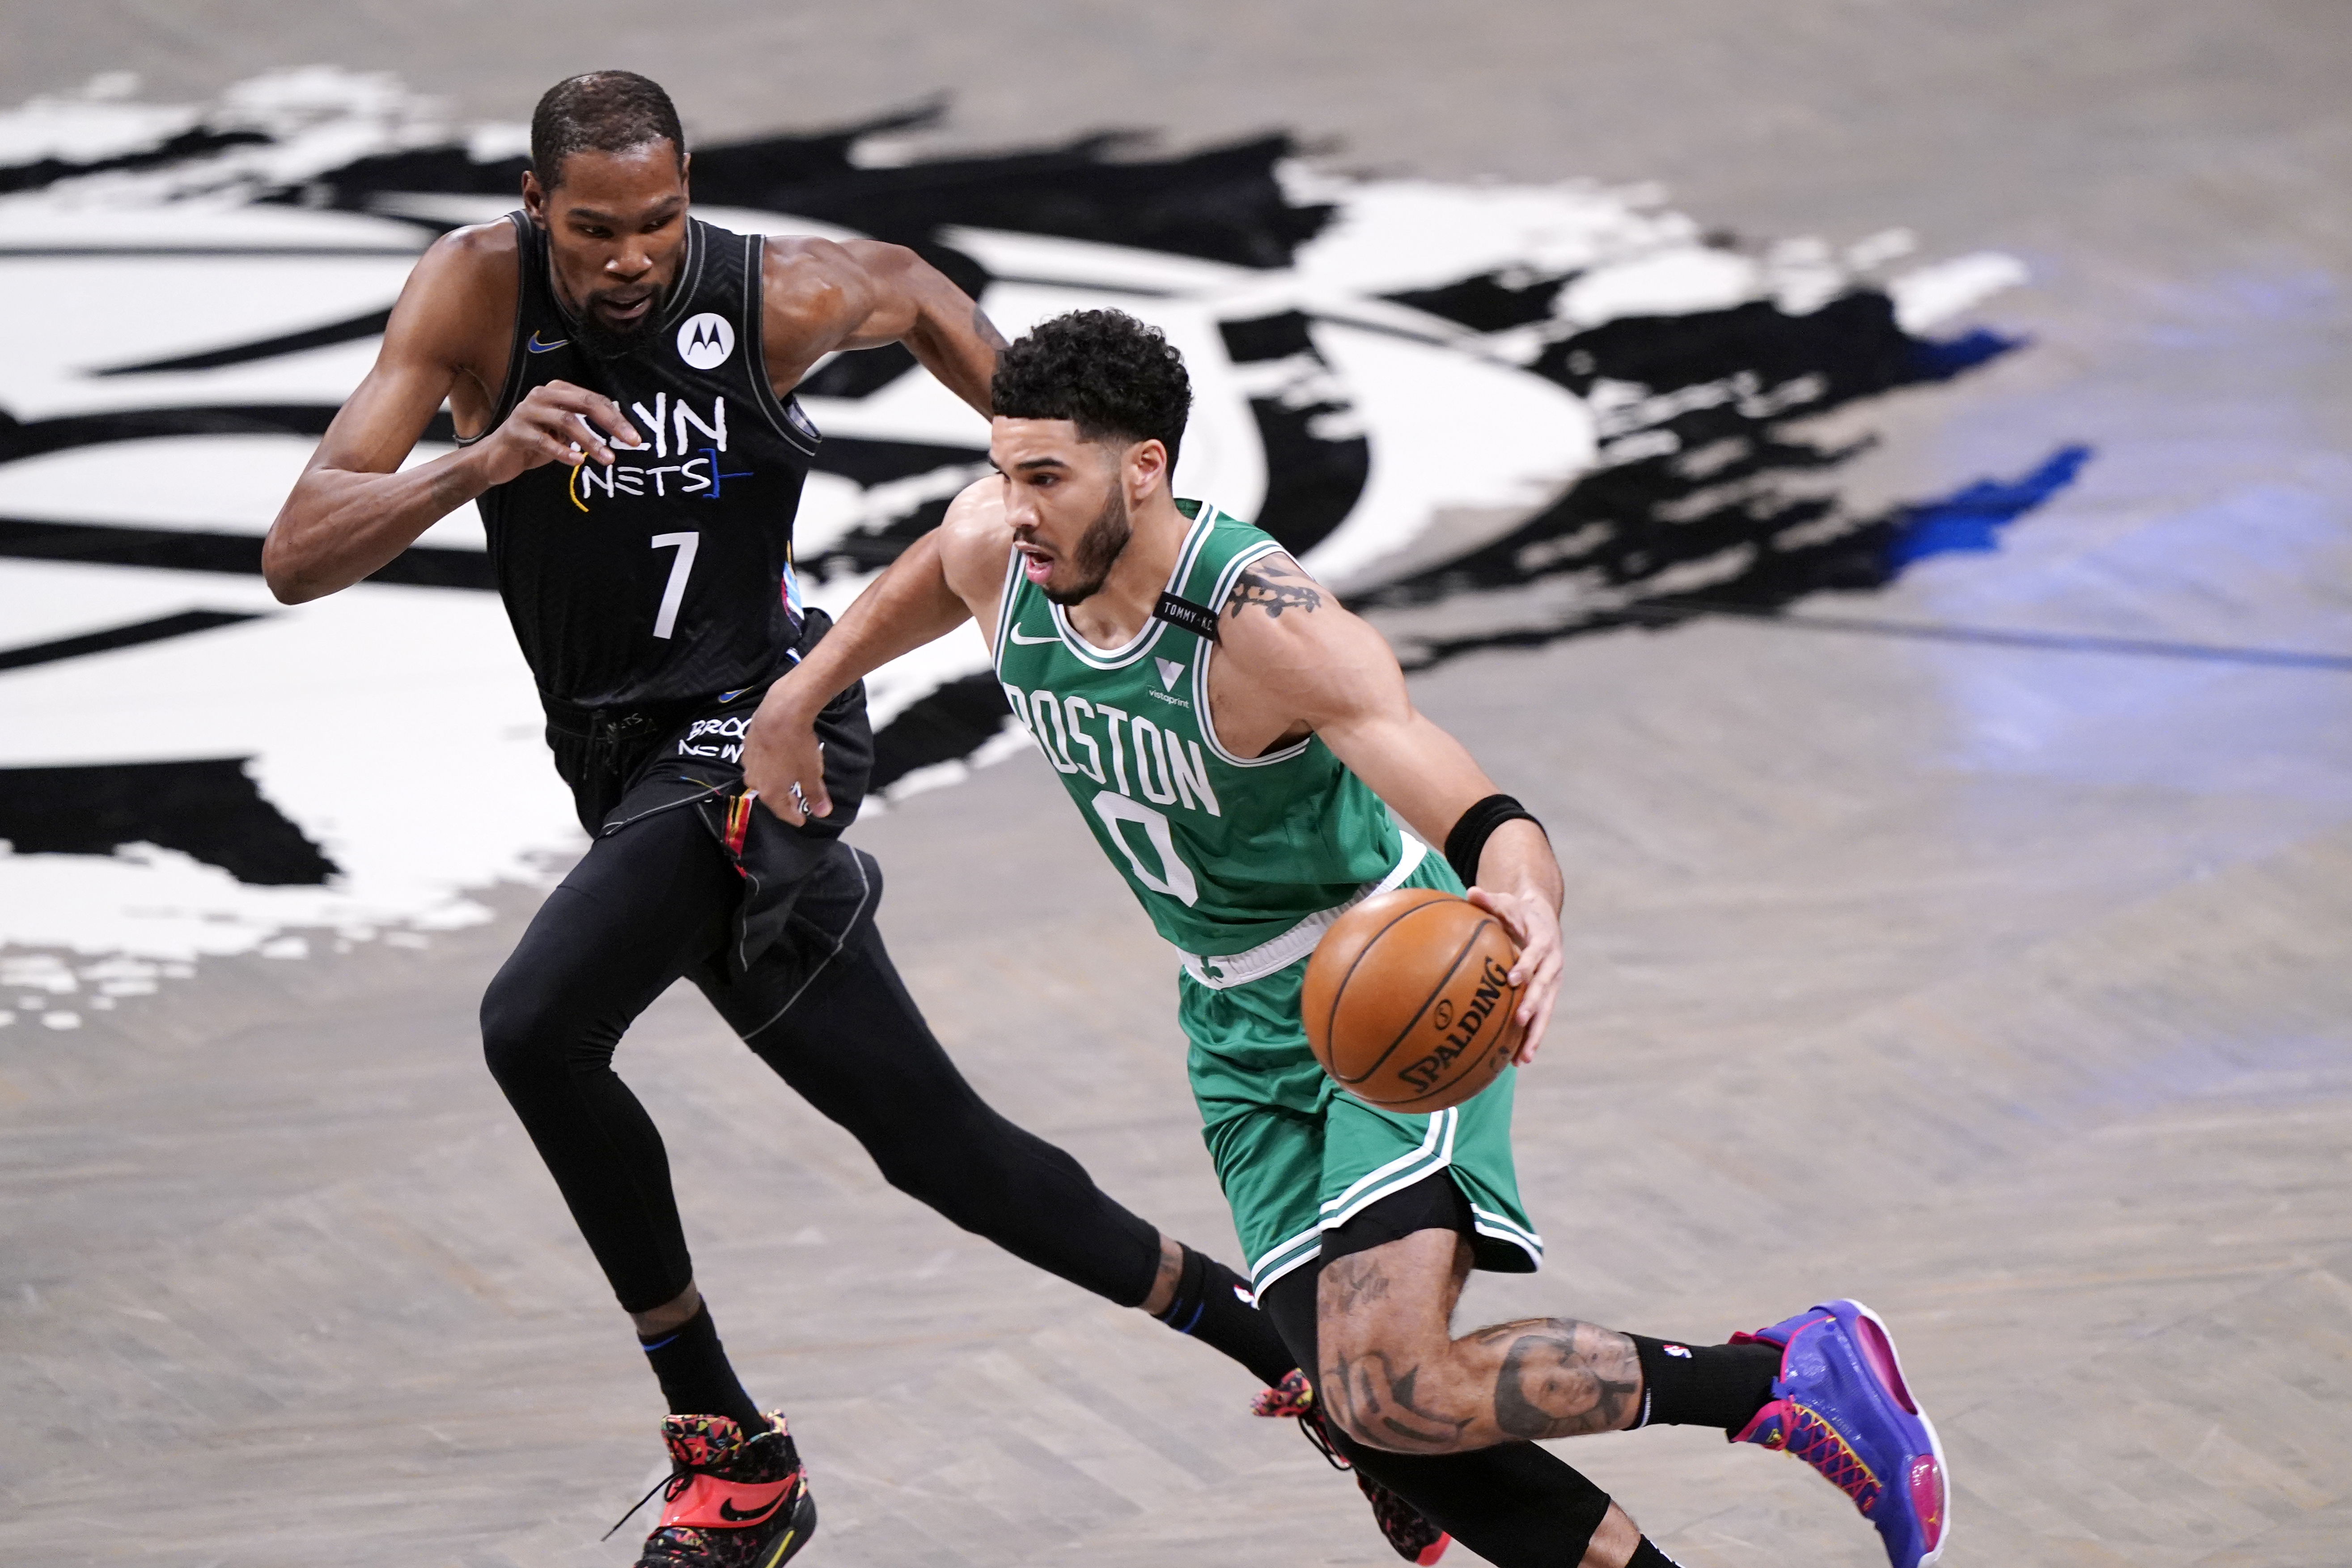 Jayson Tatum and Team Durant fall short in NBA All-Star Game